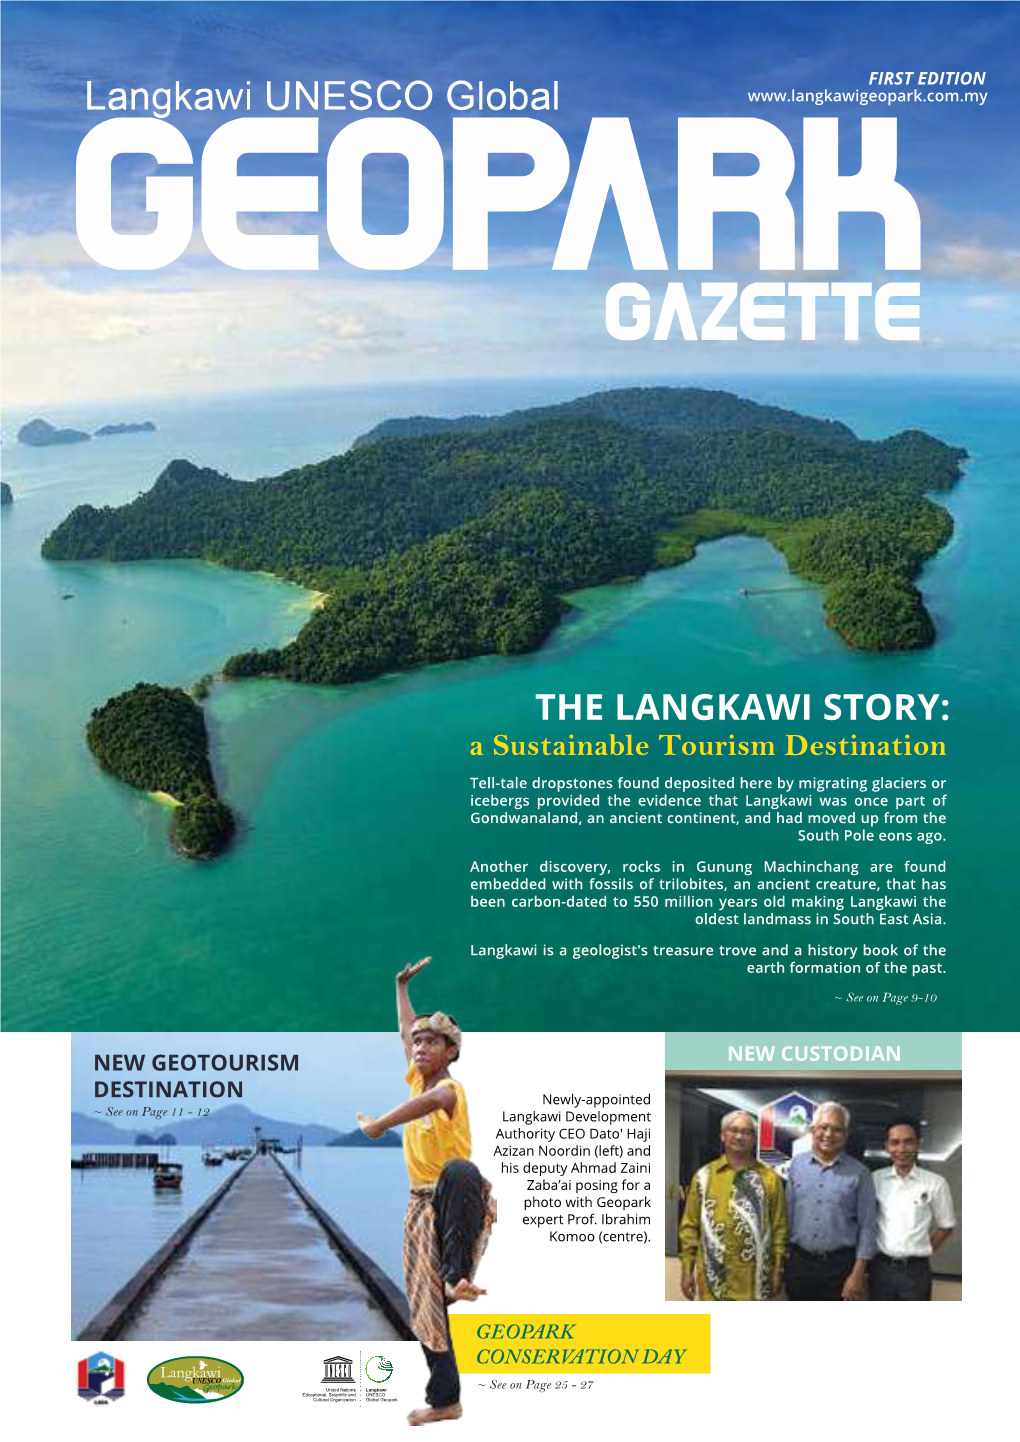 THE LANGKAWI STORY: a Sustainable Tourism Destination